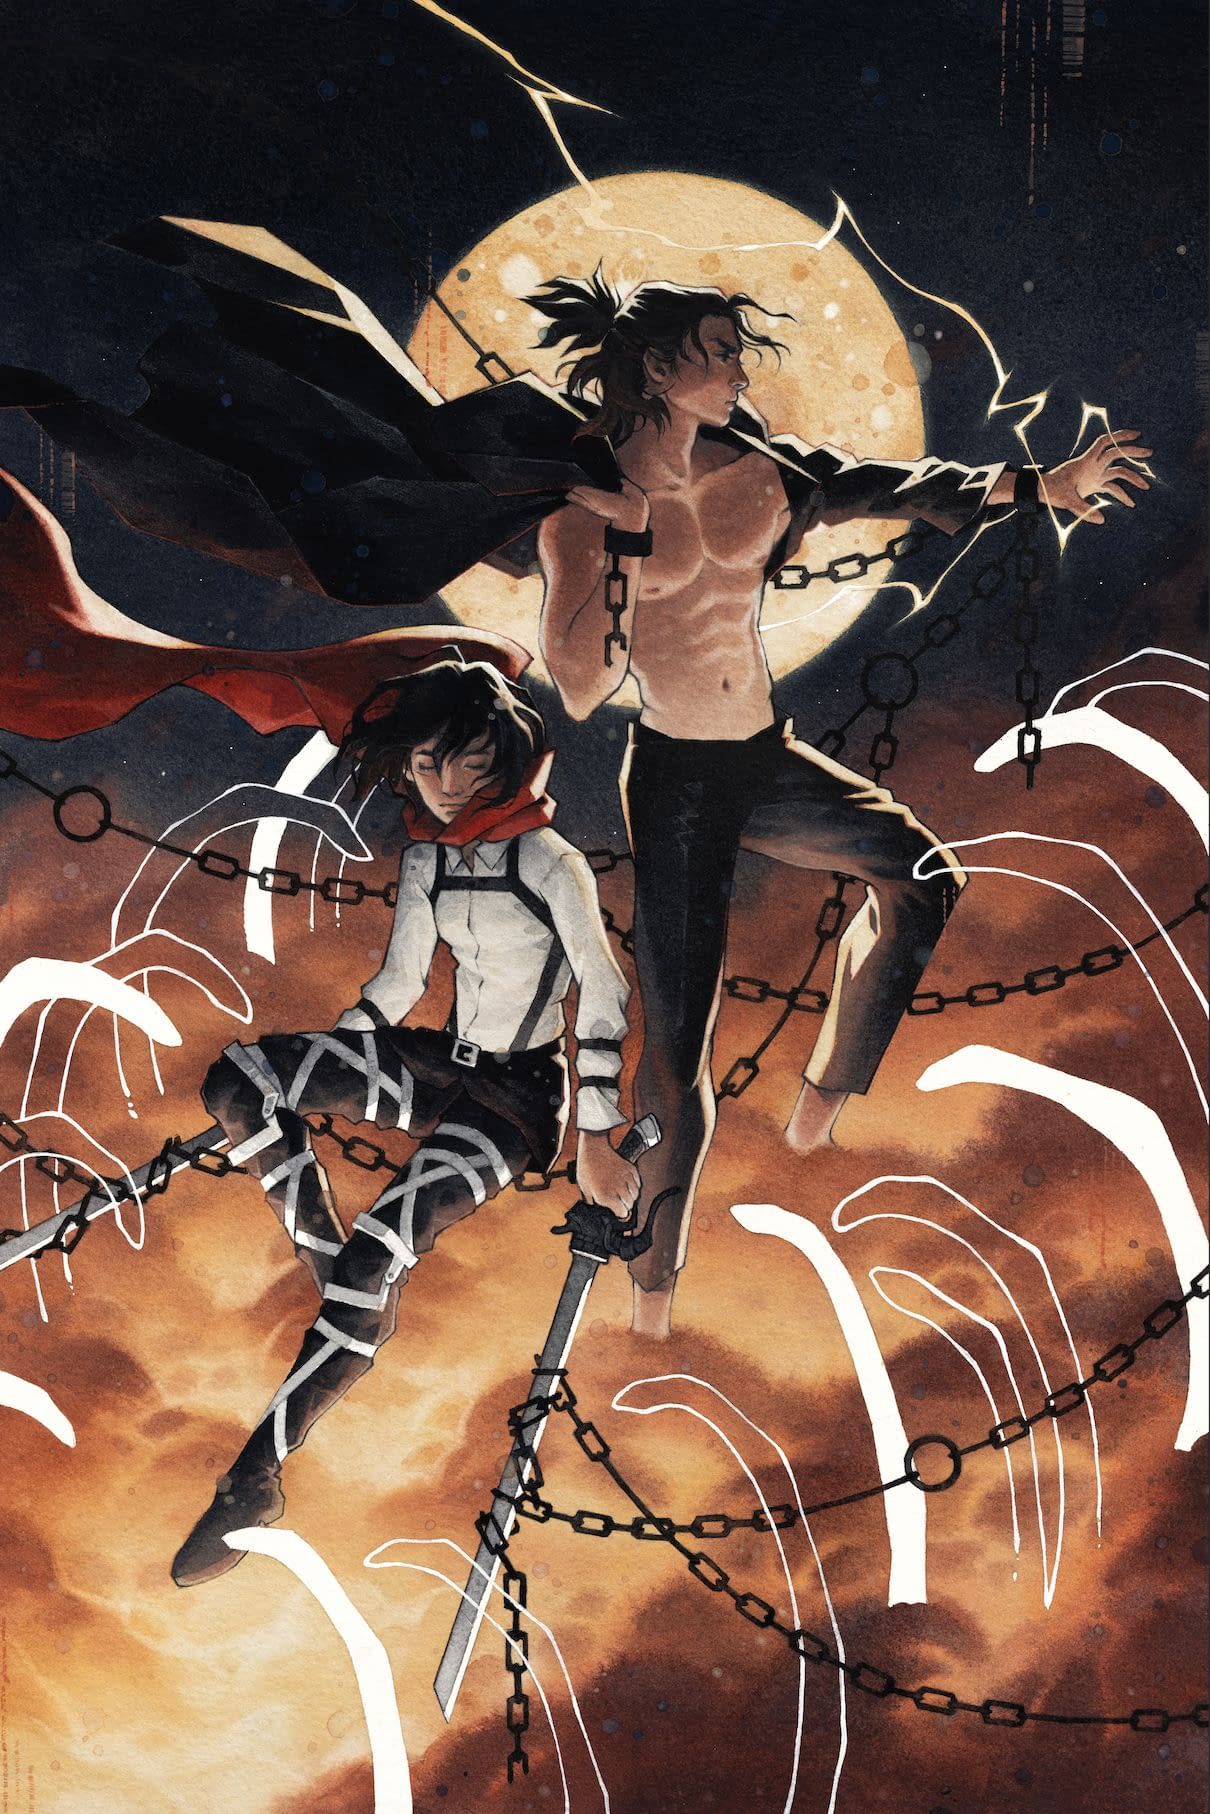 Black Clover Anime Review : Why I gave up, by Dorene Zhou